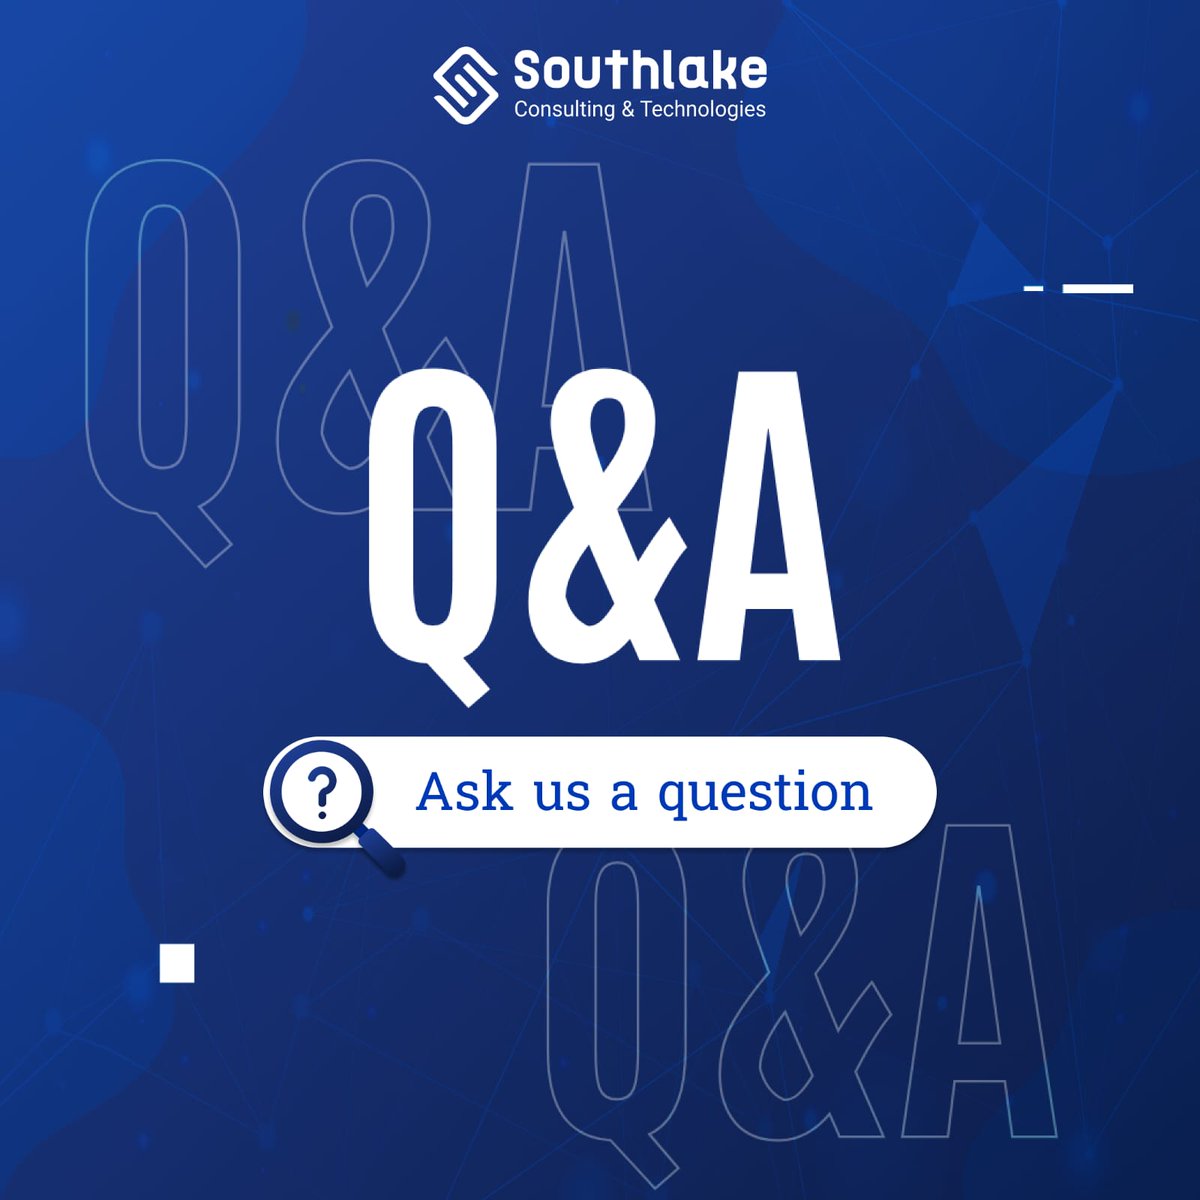 Got questions about tech, consulting, or our services? 
Our experts are here to answer them. 

Leave your questions in the comments, and we'll address them in our next Q&A session. 

#TechTalk #AskTheExperts